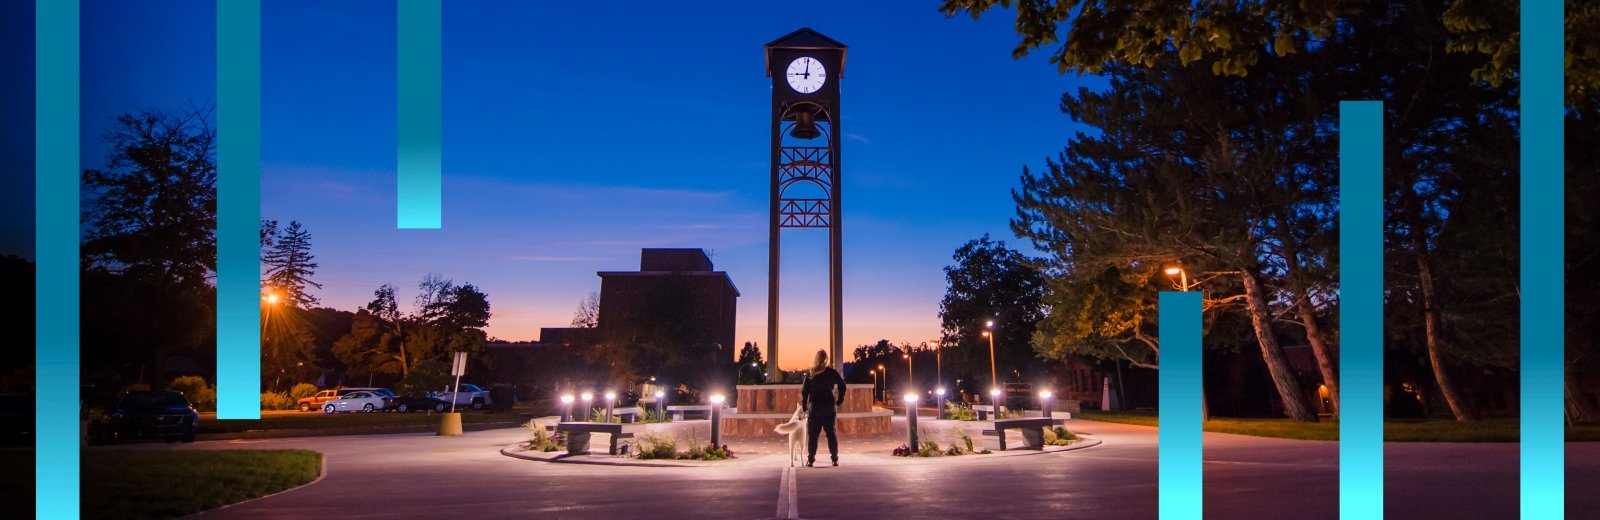 As the sun sets, the Bernard Family Clock Tower stands majestically on the campus of Michigan Tech. Dedicated on Aug. 2, 2018, the clock tower contains a large bell that rings for significant University events.